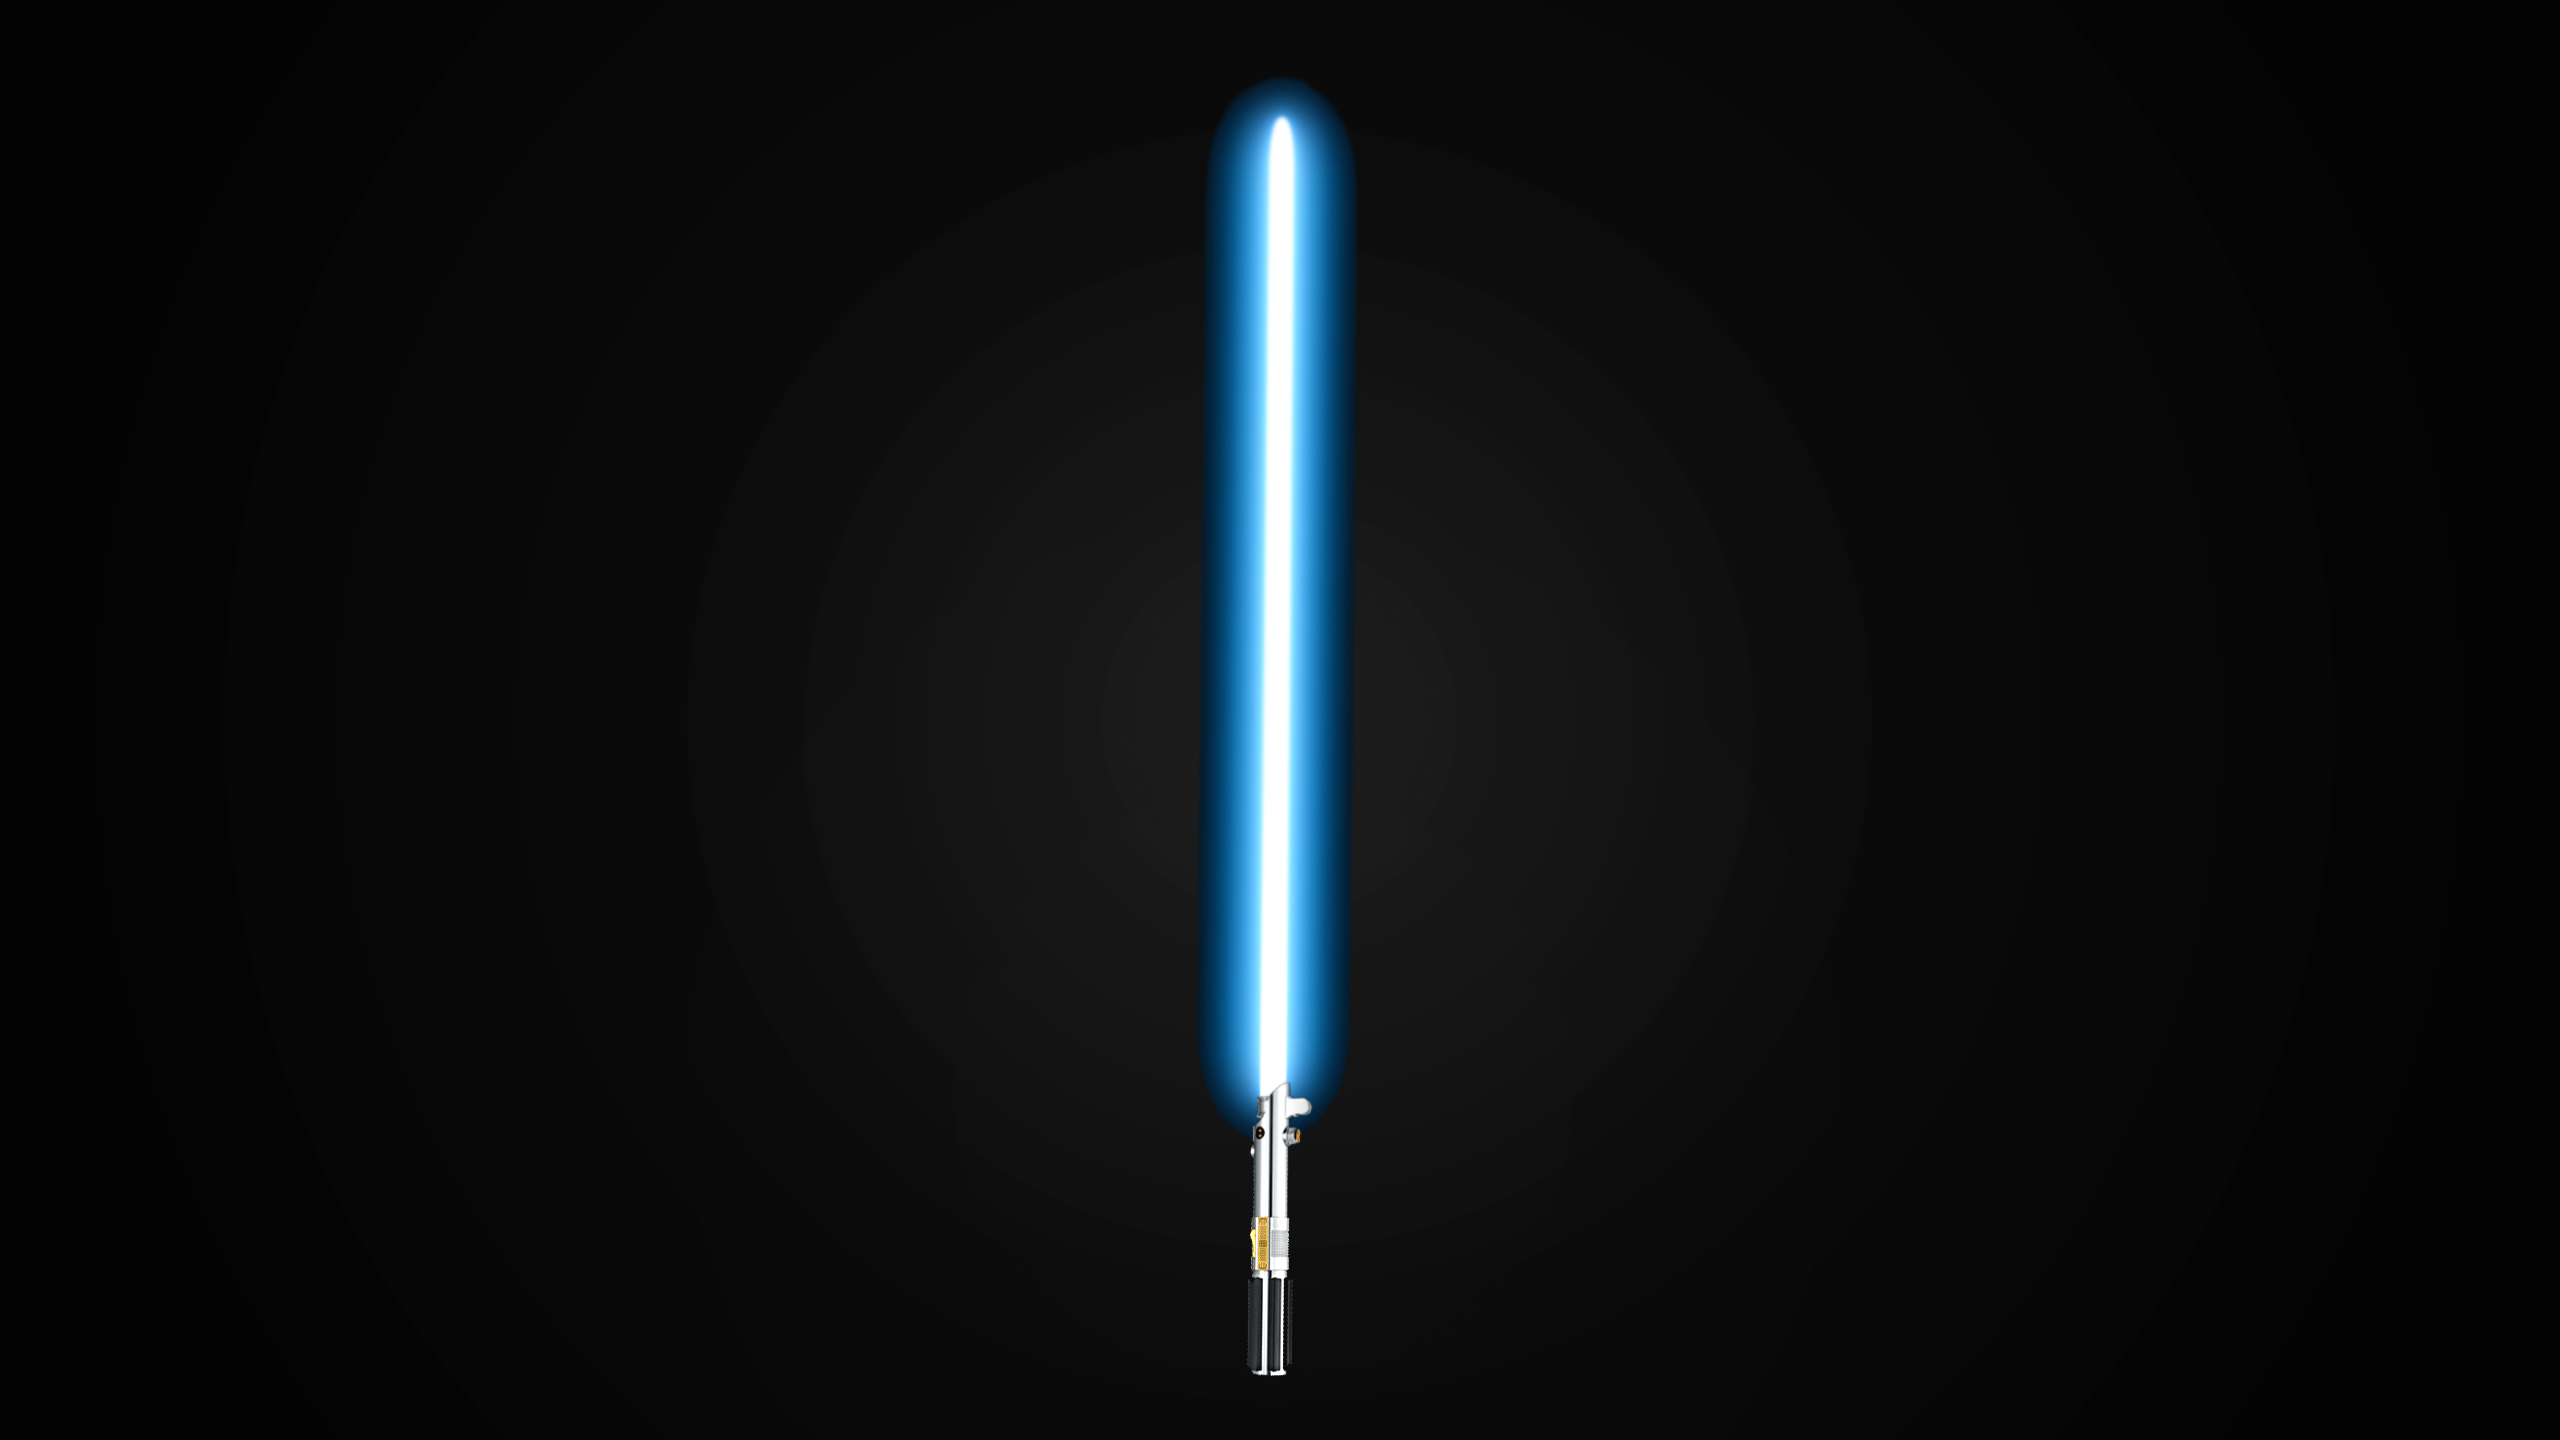 Lightsaber, star wars, movies, 2560x1440 HD Wallpaper and FREE